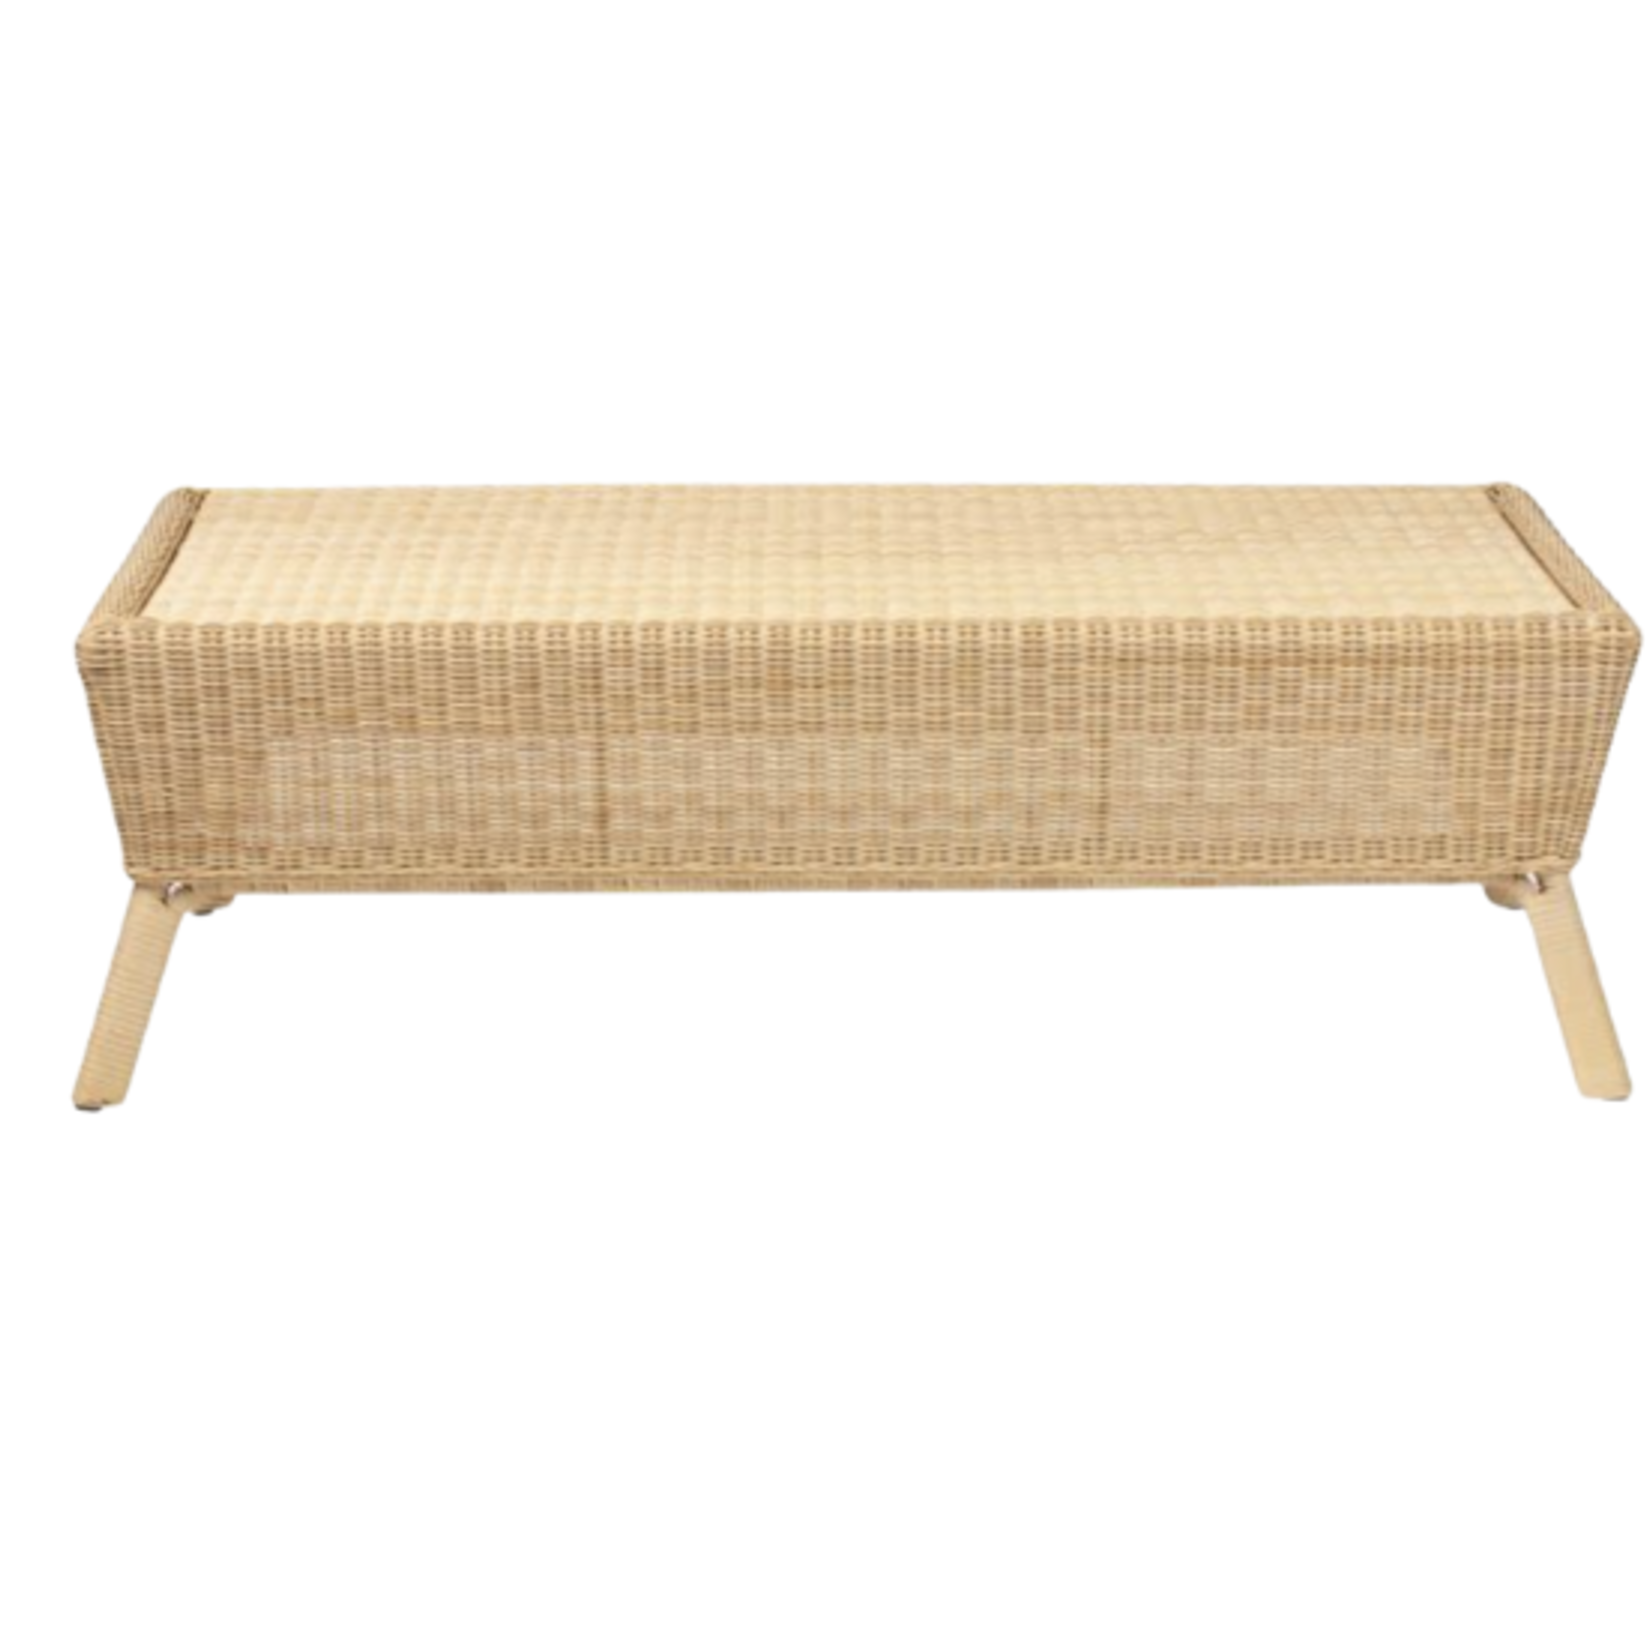 Made Goods Dunley Coffee Table, Light Natural Faux Wicker